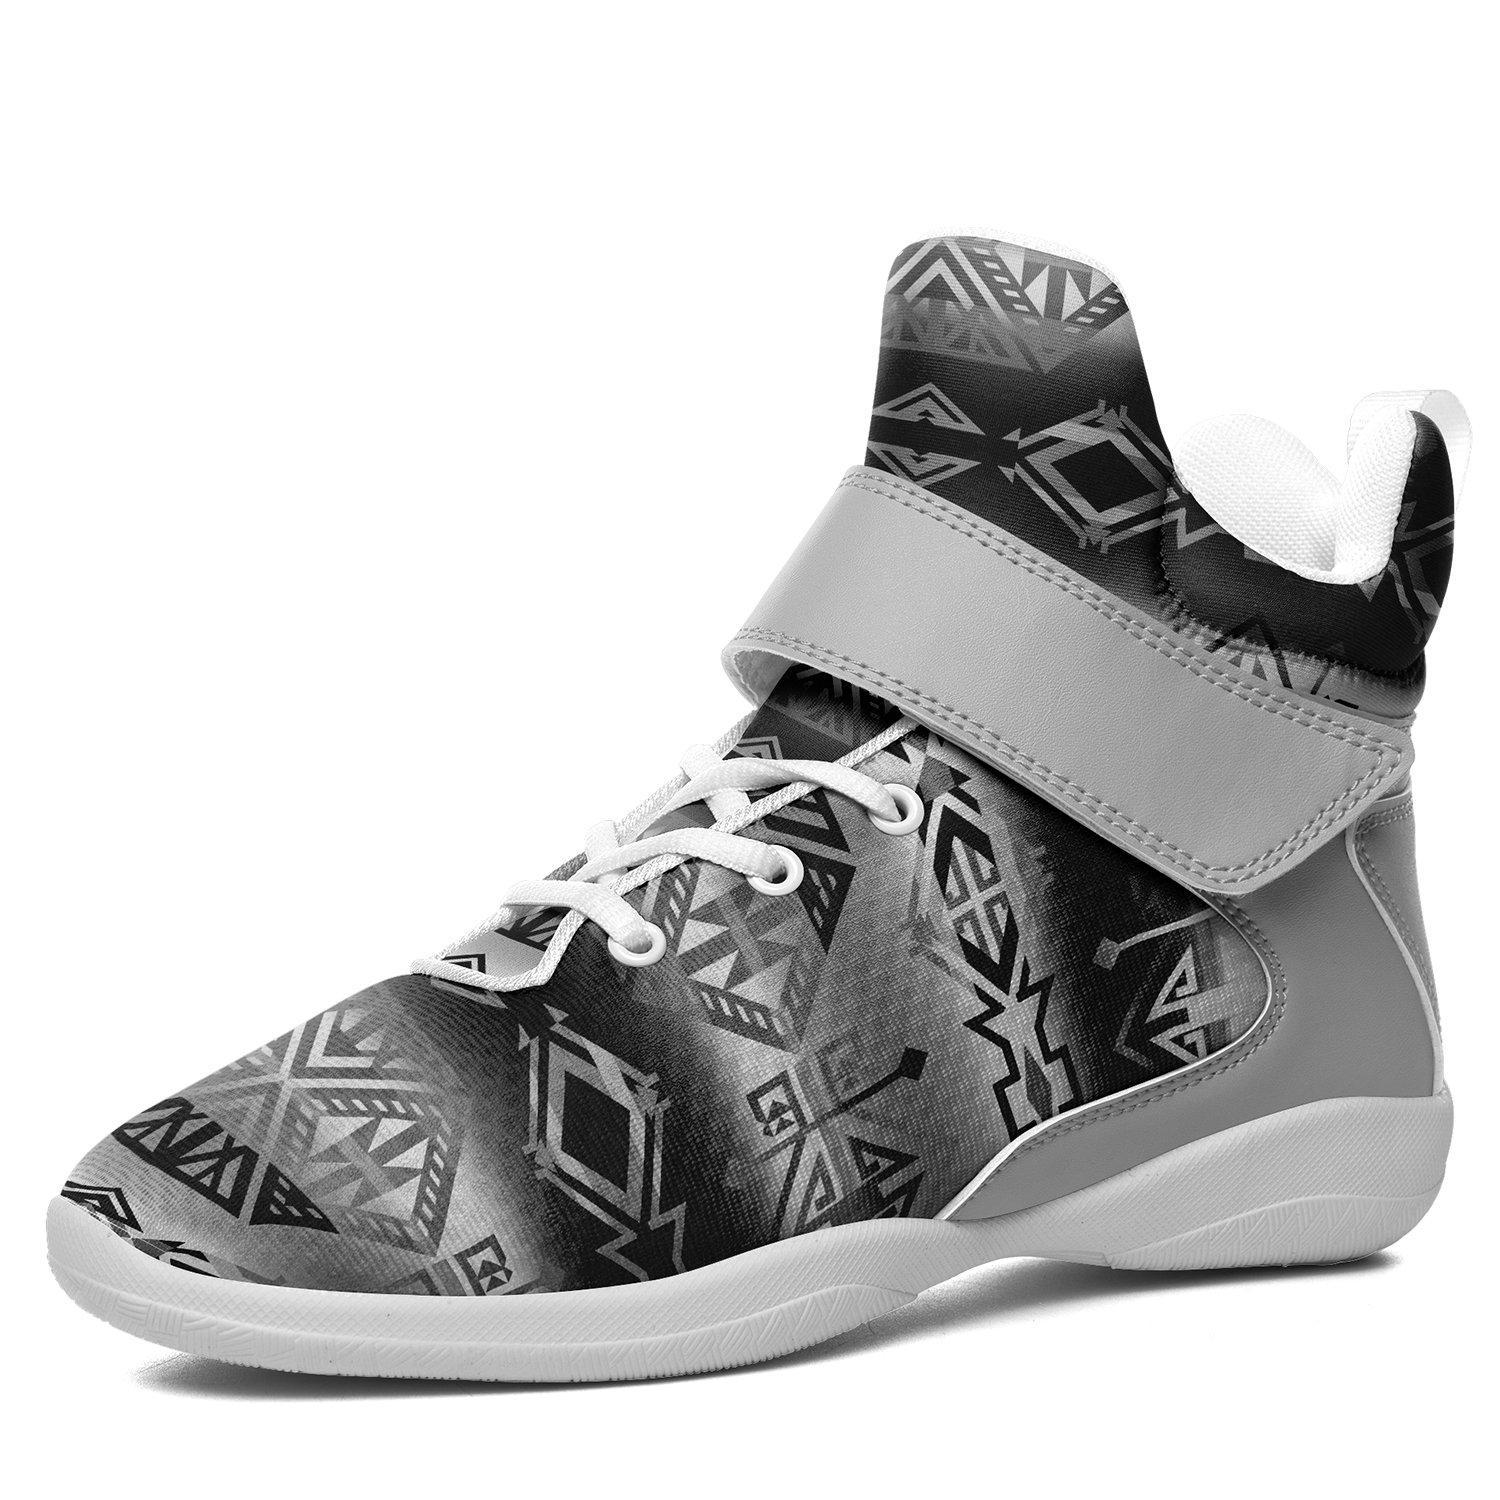 Trade Route Cave Kid's Ipottaa Basketball / Sport High Top Shoes 49 Dzine US Women 4.5 / US Youth 3.5 / EUR 35 White Sole with Gray Strap 